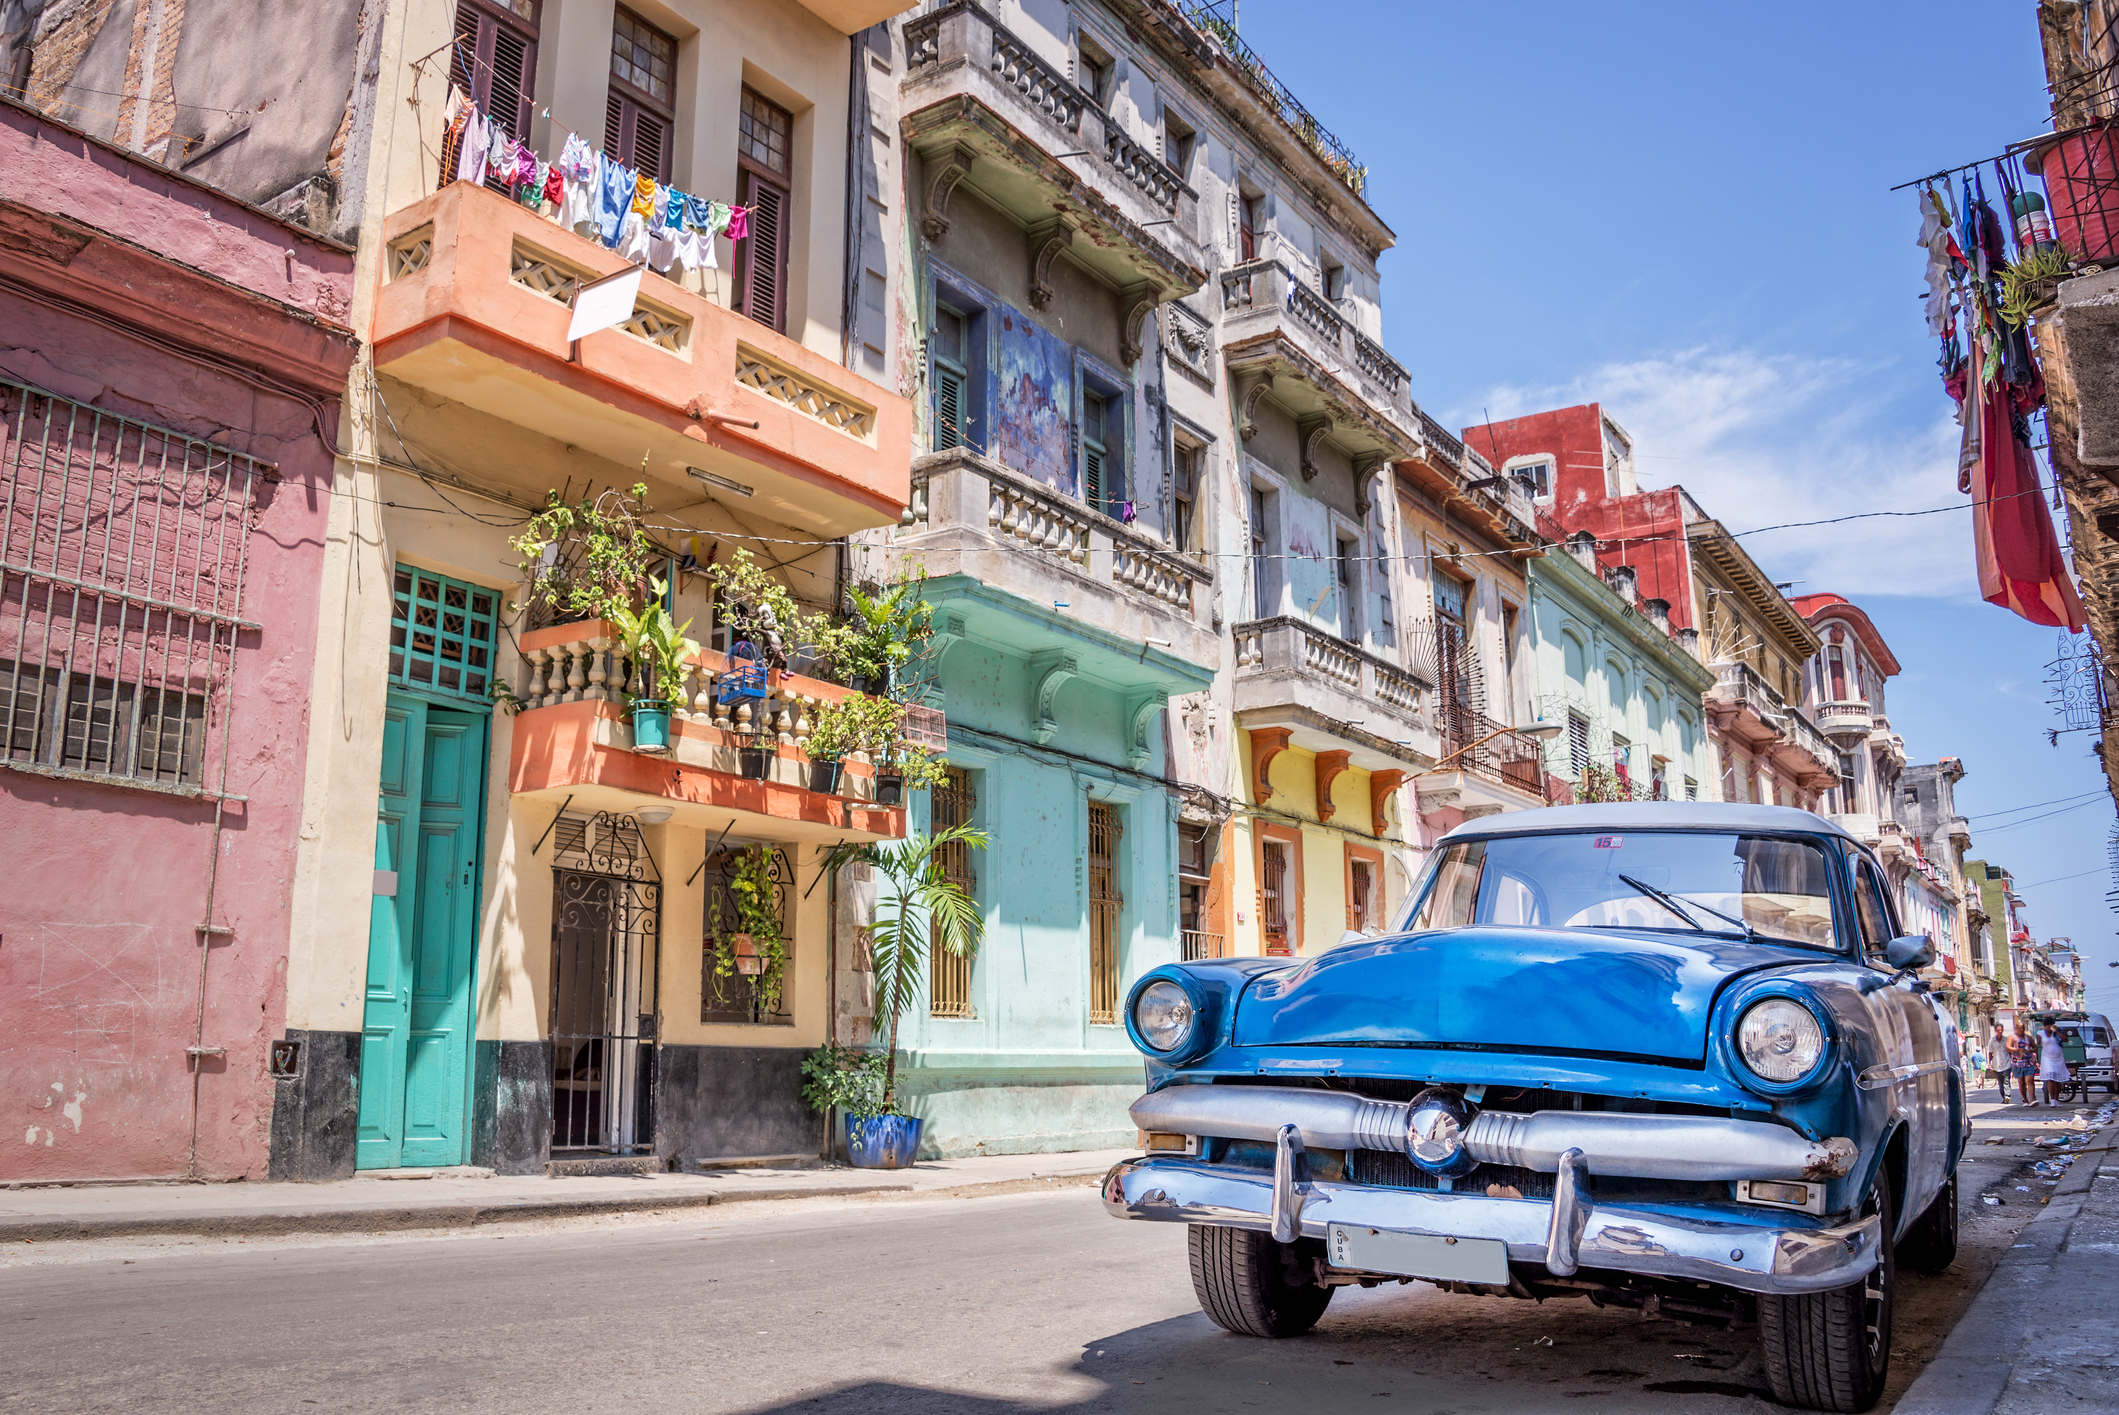 Traveling to Cuba as an American: A Step-by-Step Guide